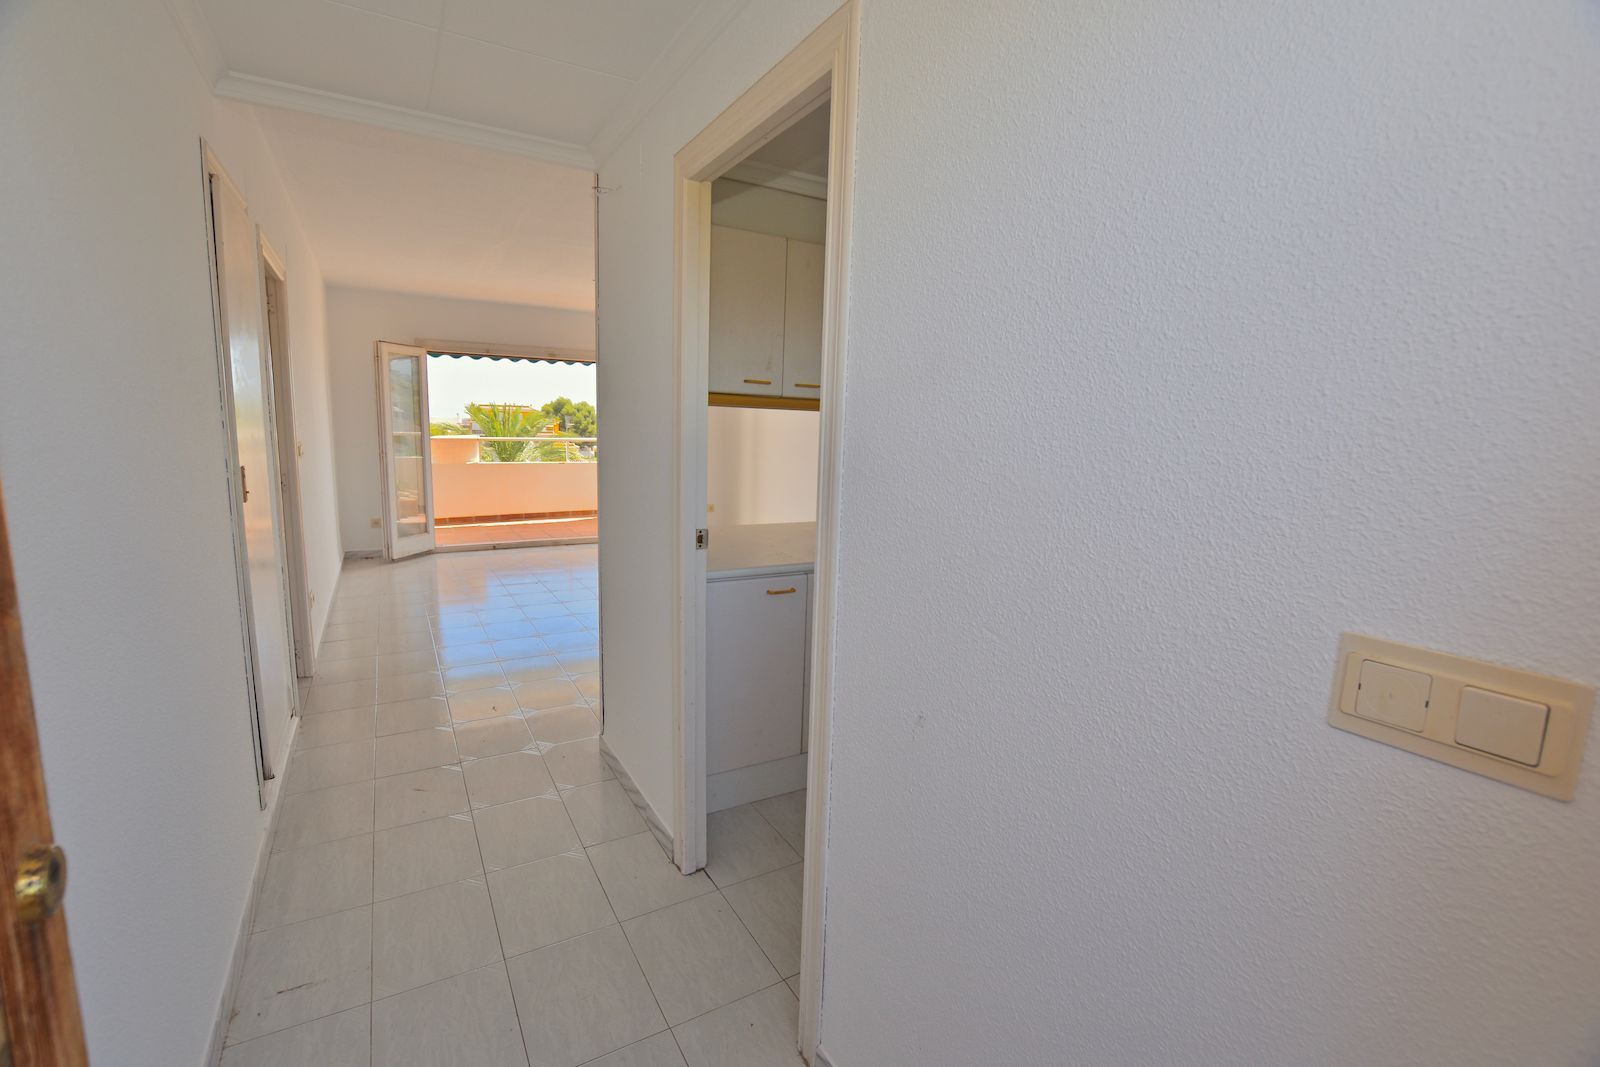 Apartment for sale with Sea View in Cala Blanca - Javea